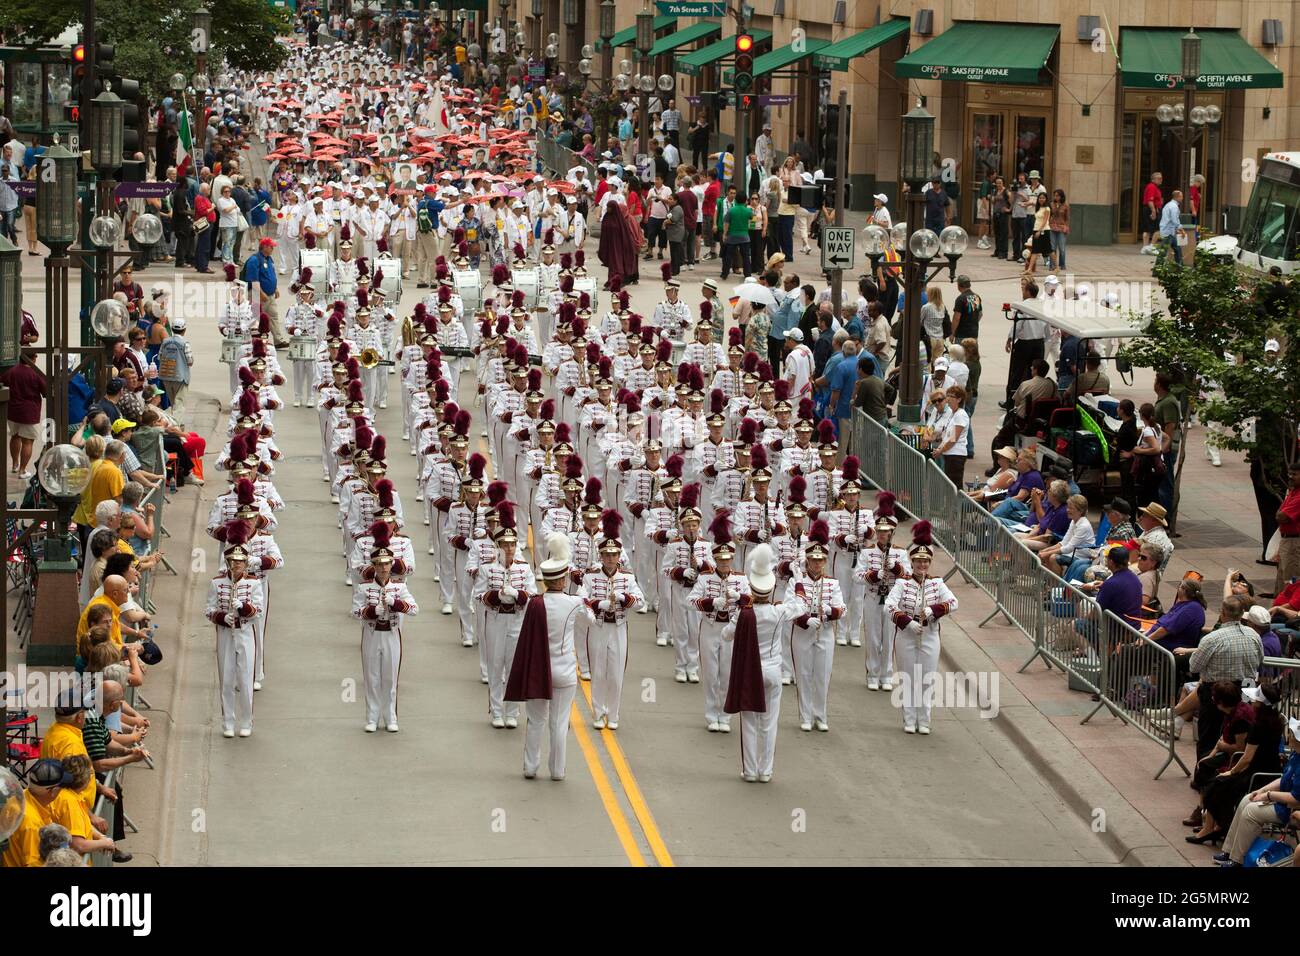 Fergus Falls High School Marching Band in the Lions Clubs International Parade on Nicollet Mall, Minneapolis, Minnesota, 2009 Stock Photo